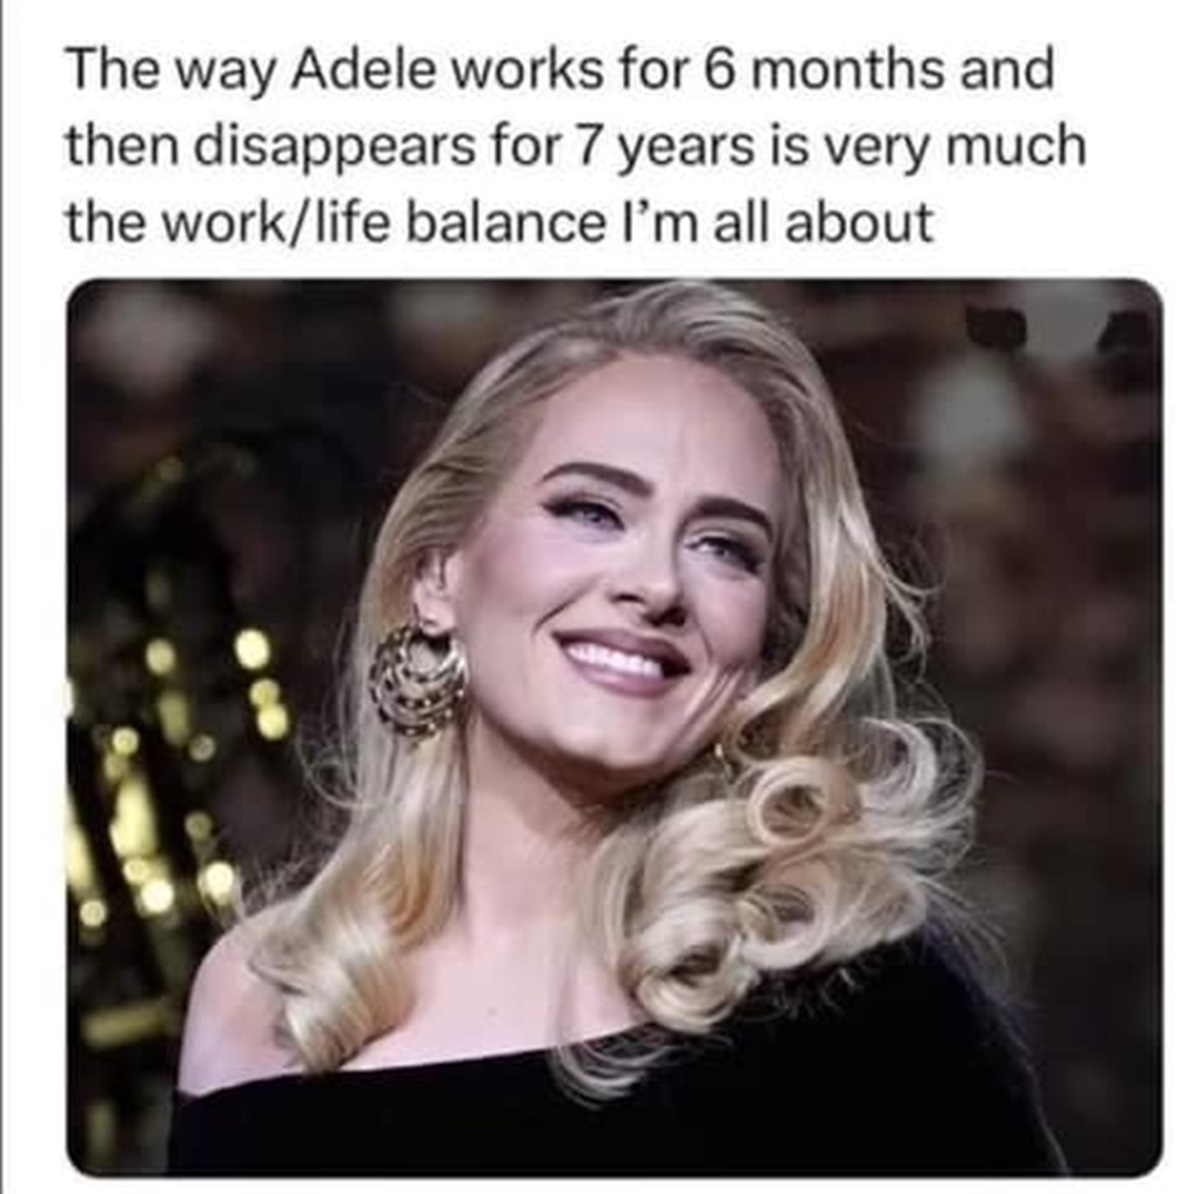 adele las vegas - The way Adele works for 6 months and then disappears for 7 years is very much the worklife balance I'm all about